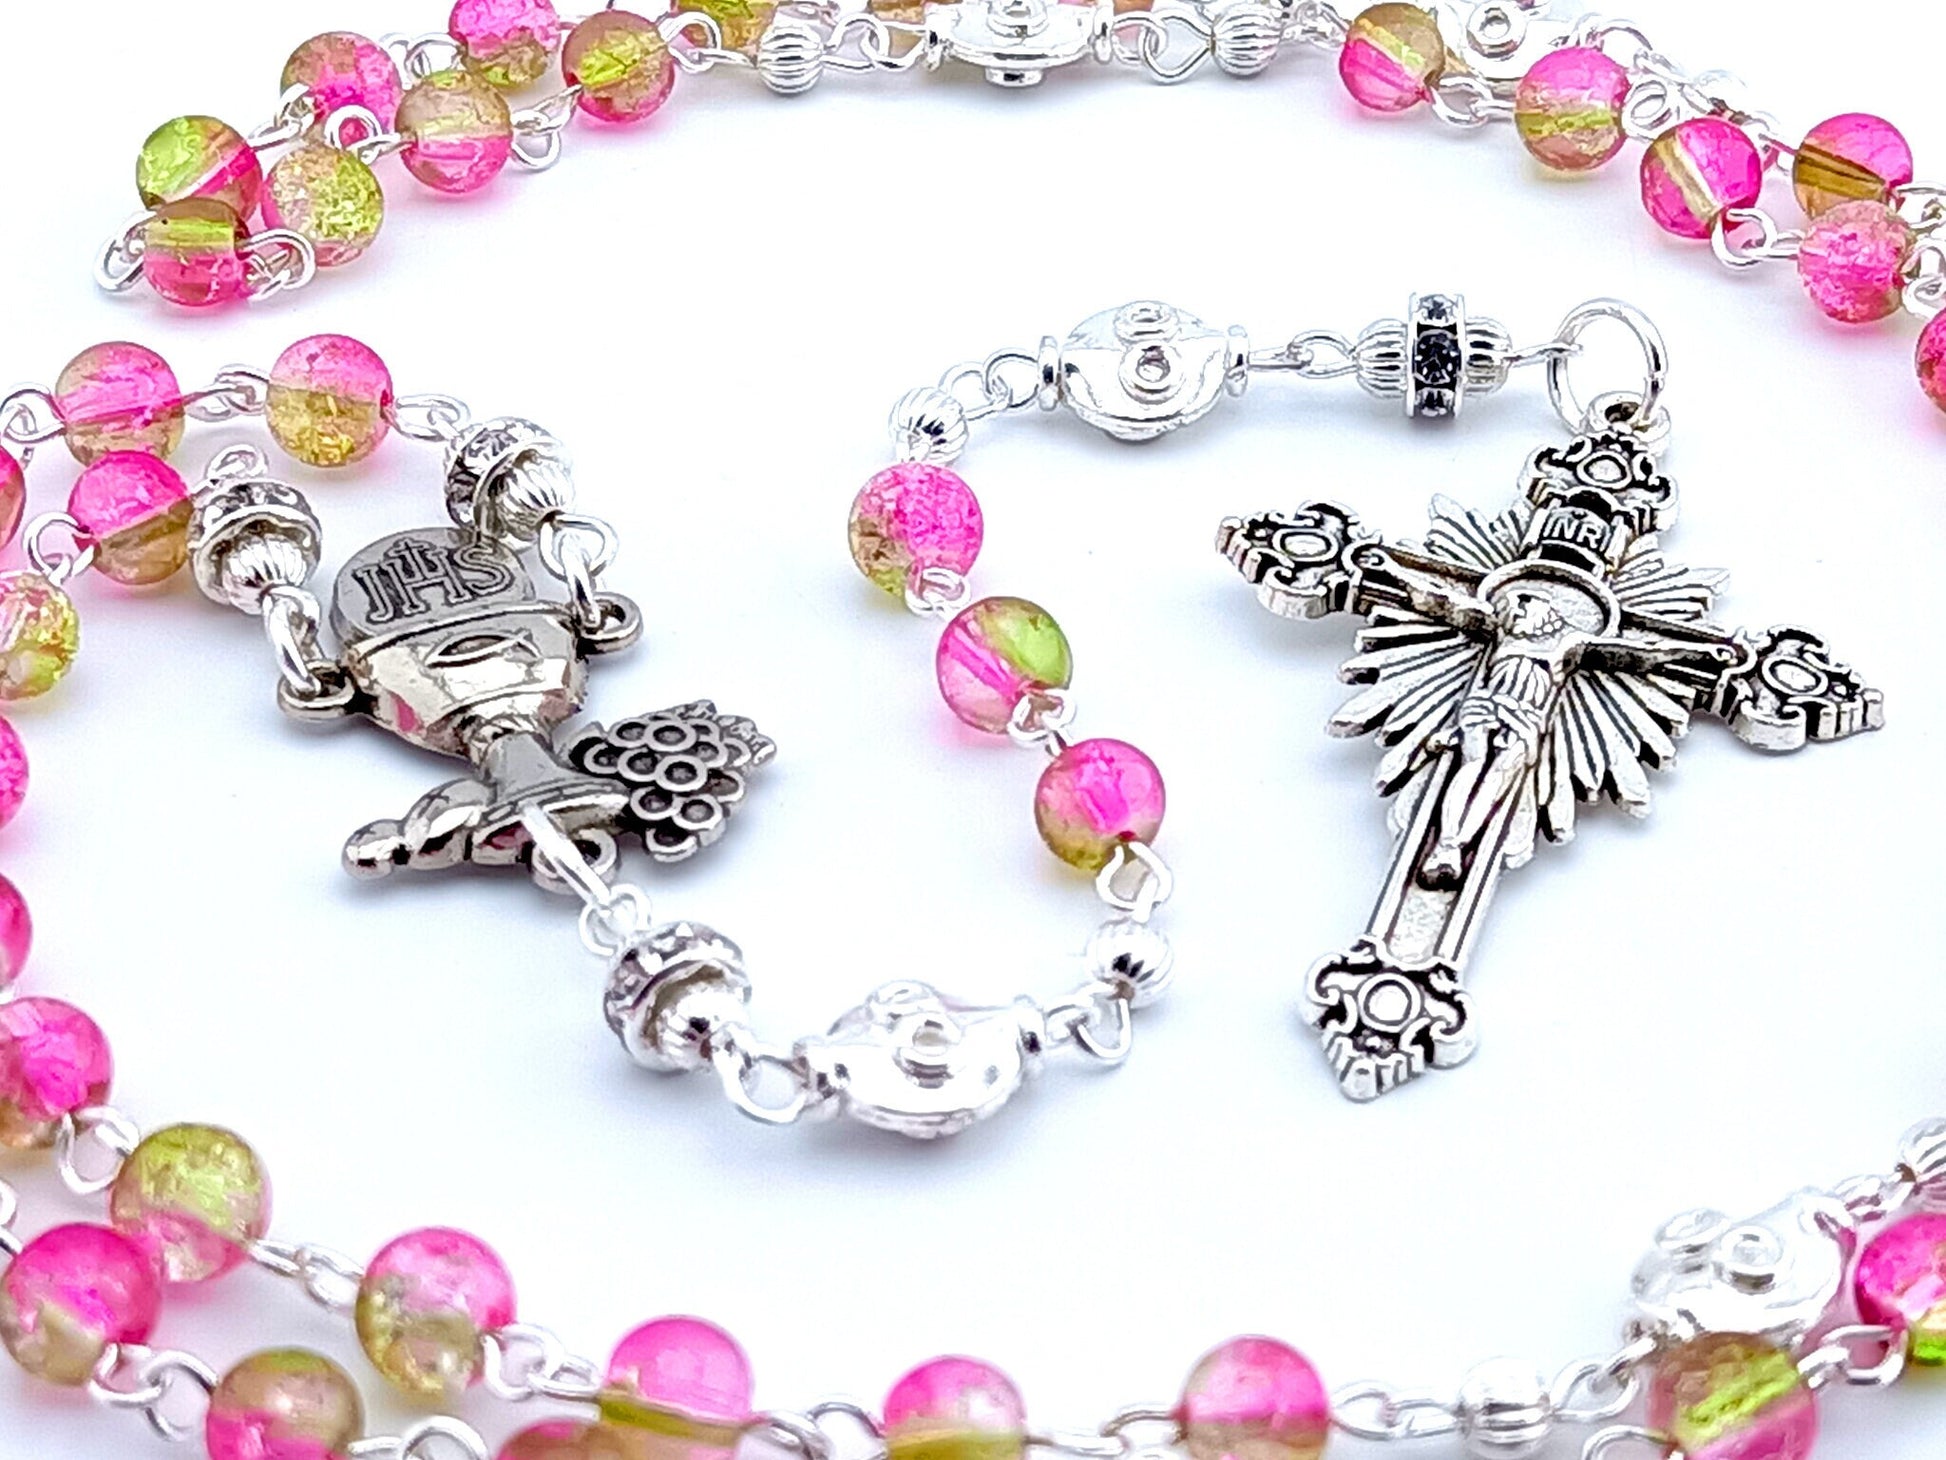 First Holy Communion unique rosary beads with pink and green glass beads, silver Eucharist centre medal and sunburst crucifix.